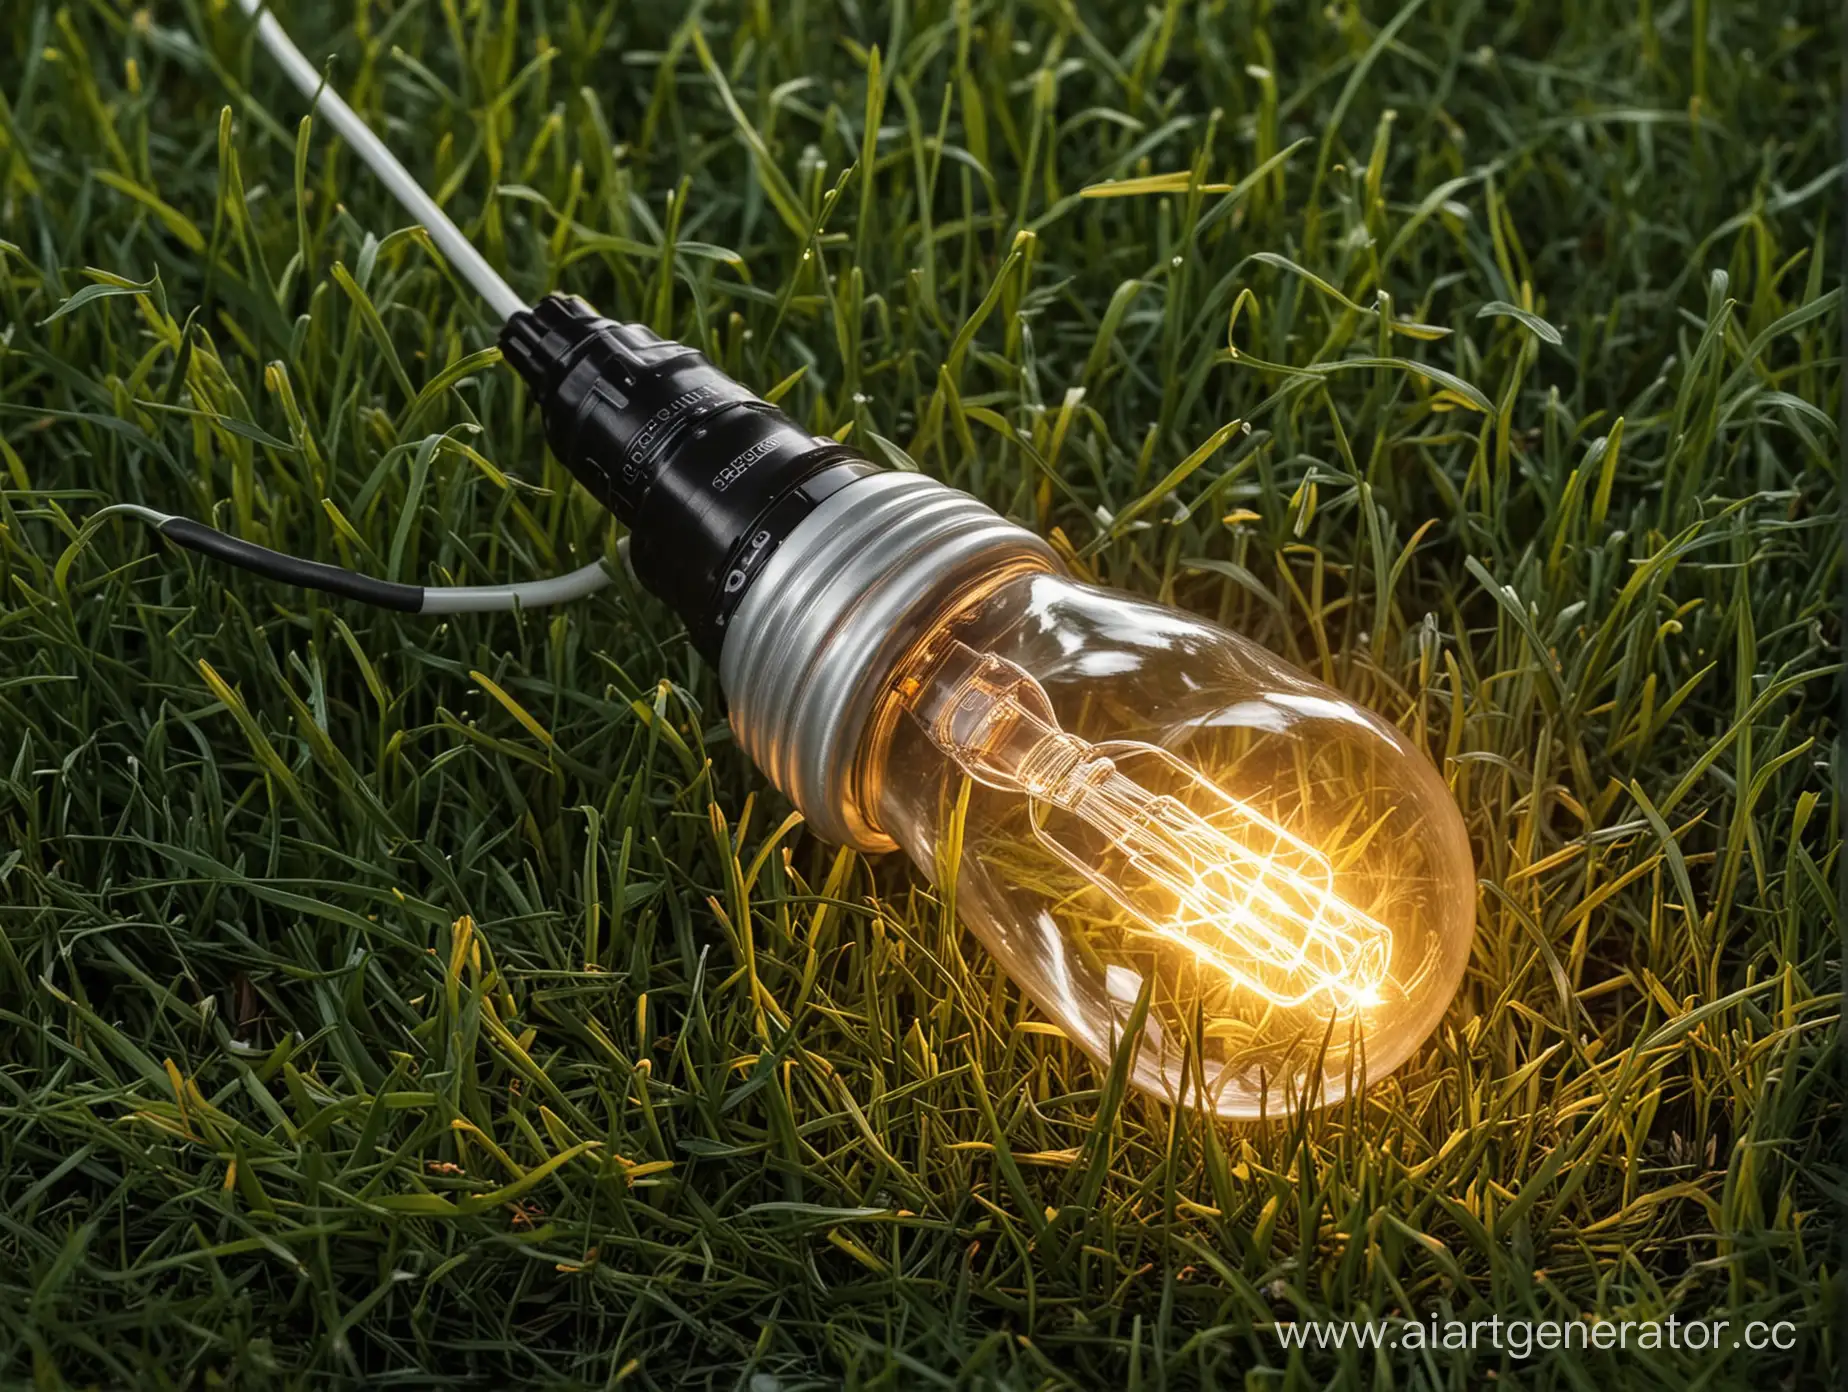 A glowing light bulb lies in the grass screwed into a socket from which an electric wire extends.